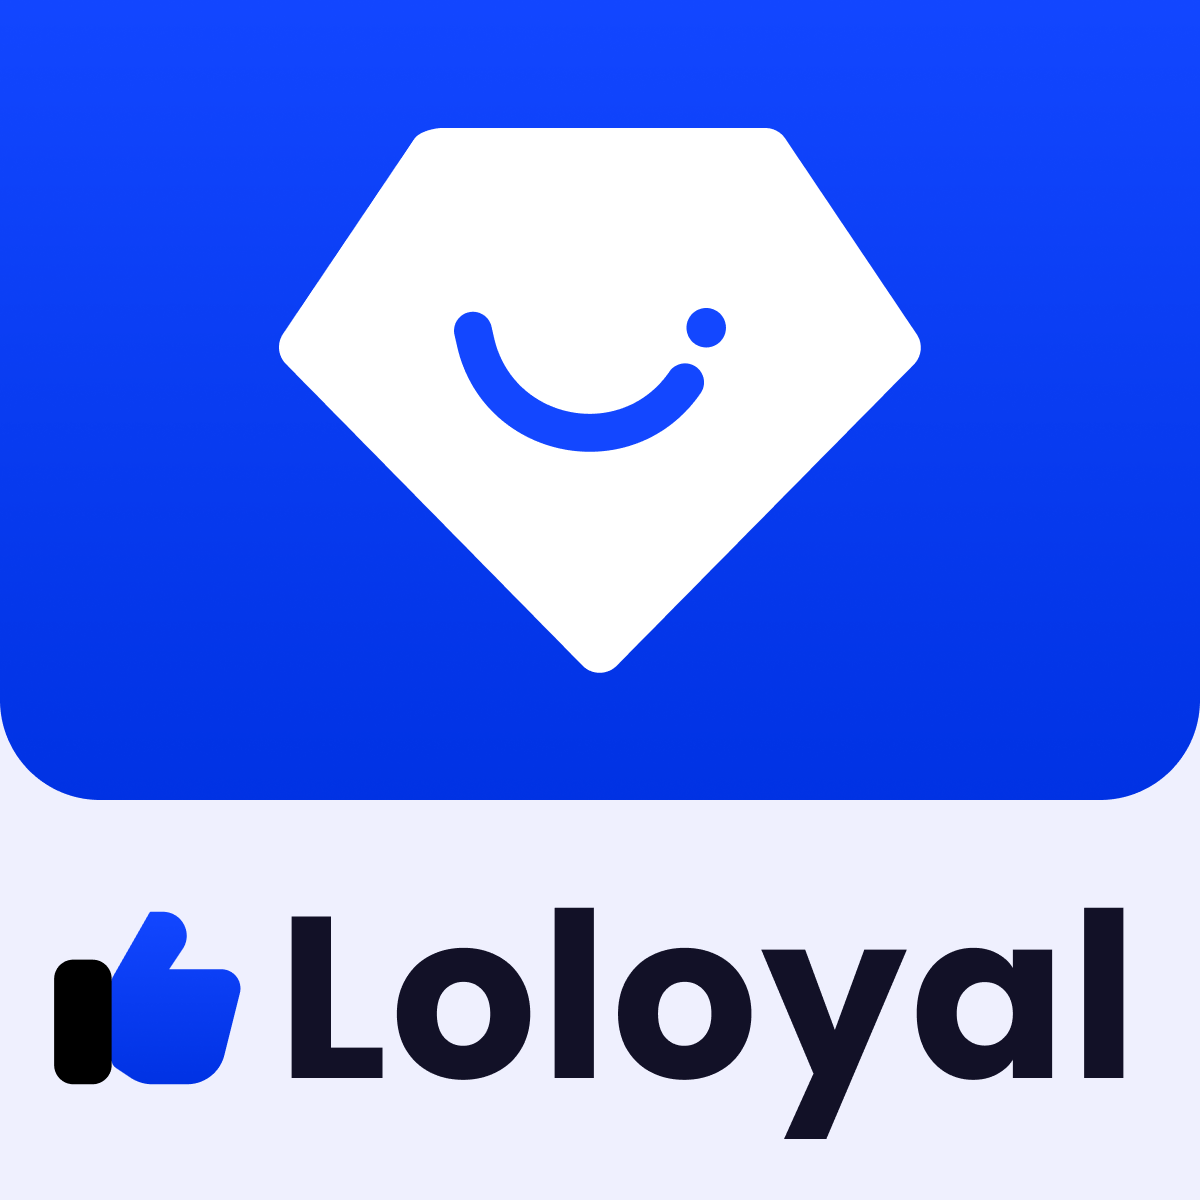 Loloyal: Loyalty and Referral